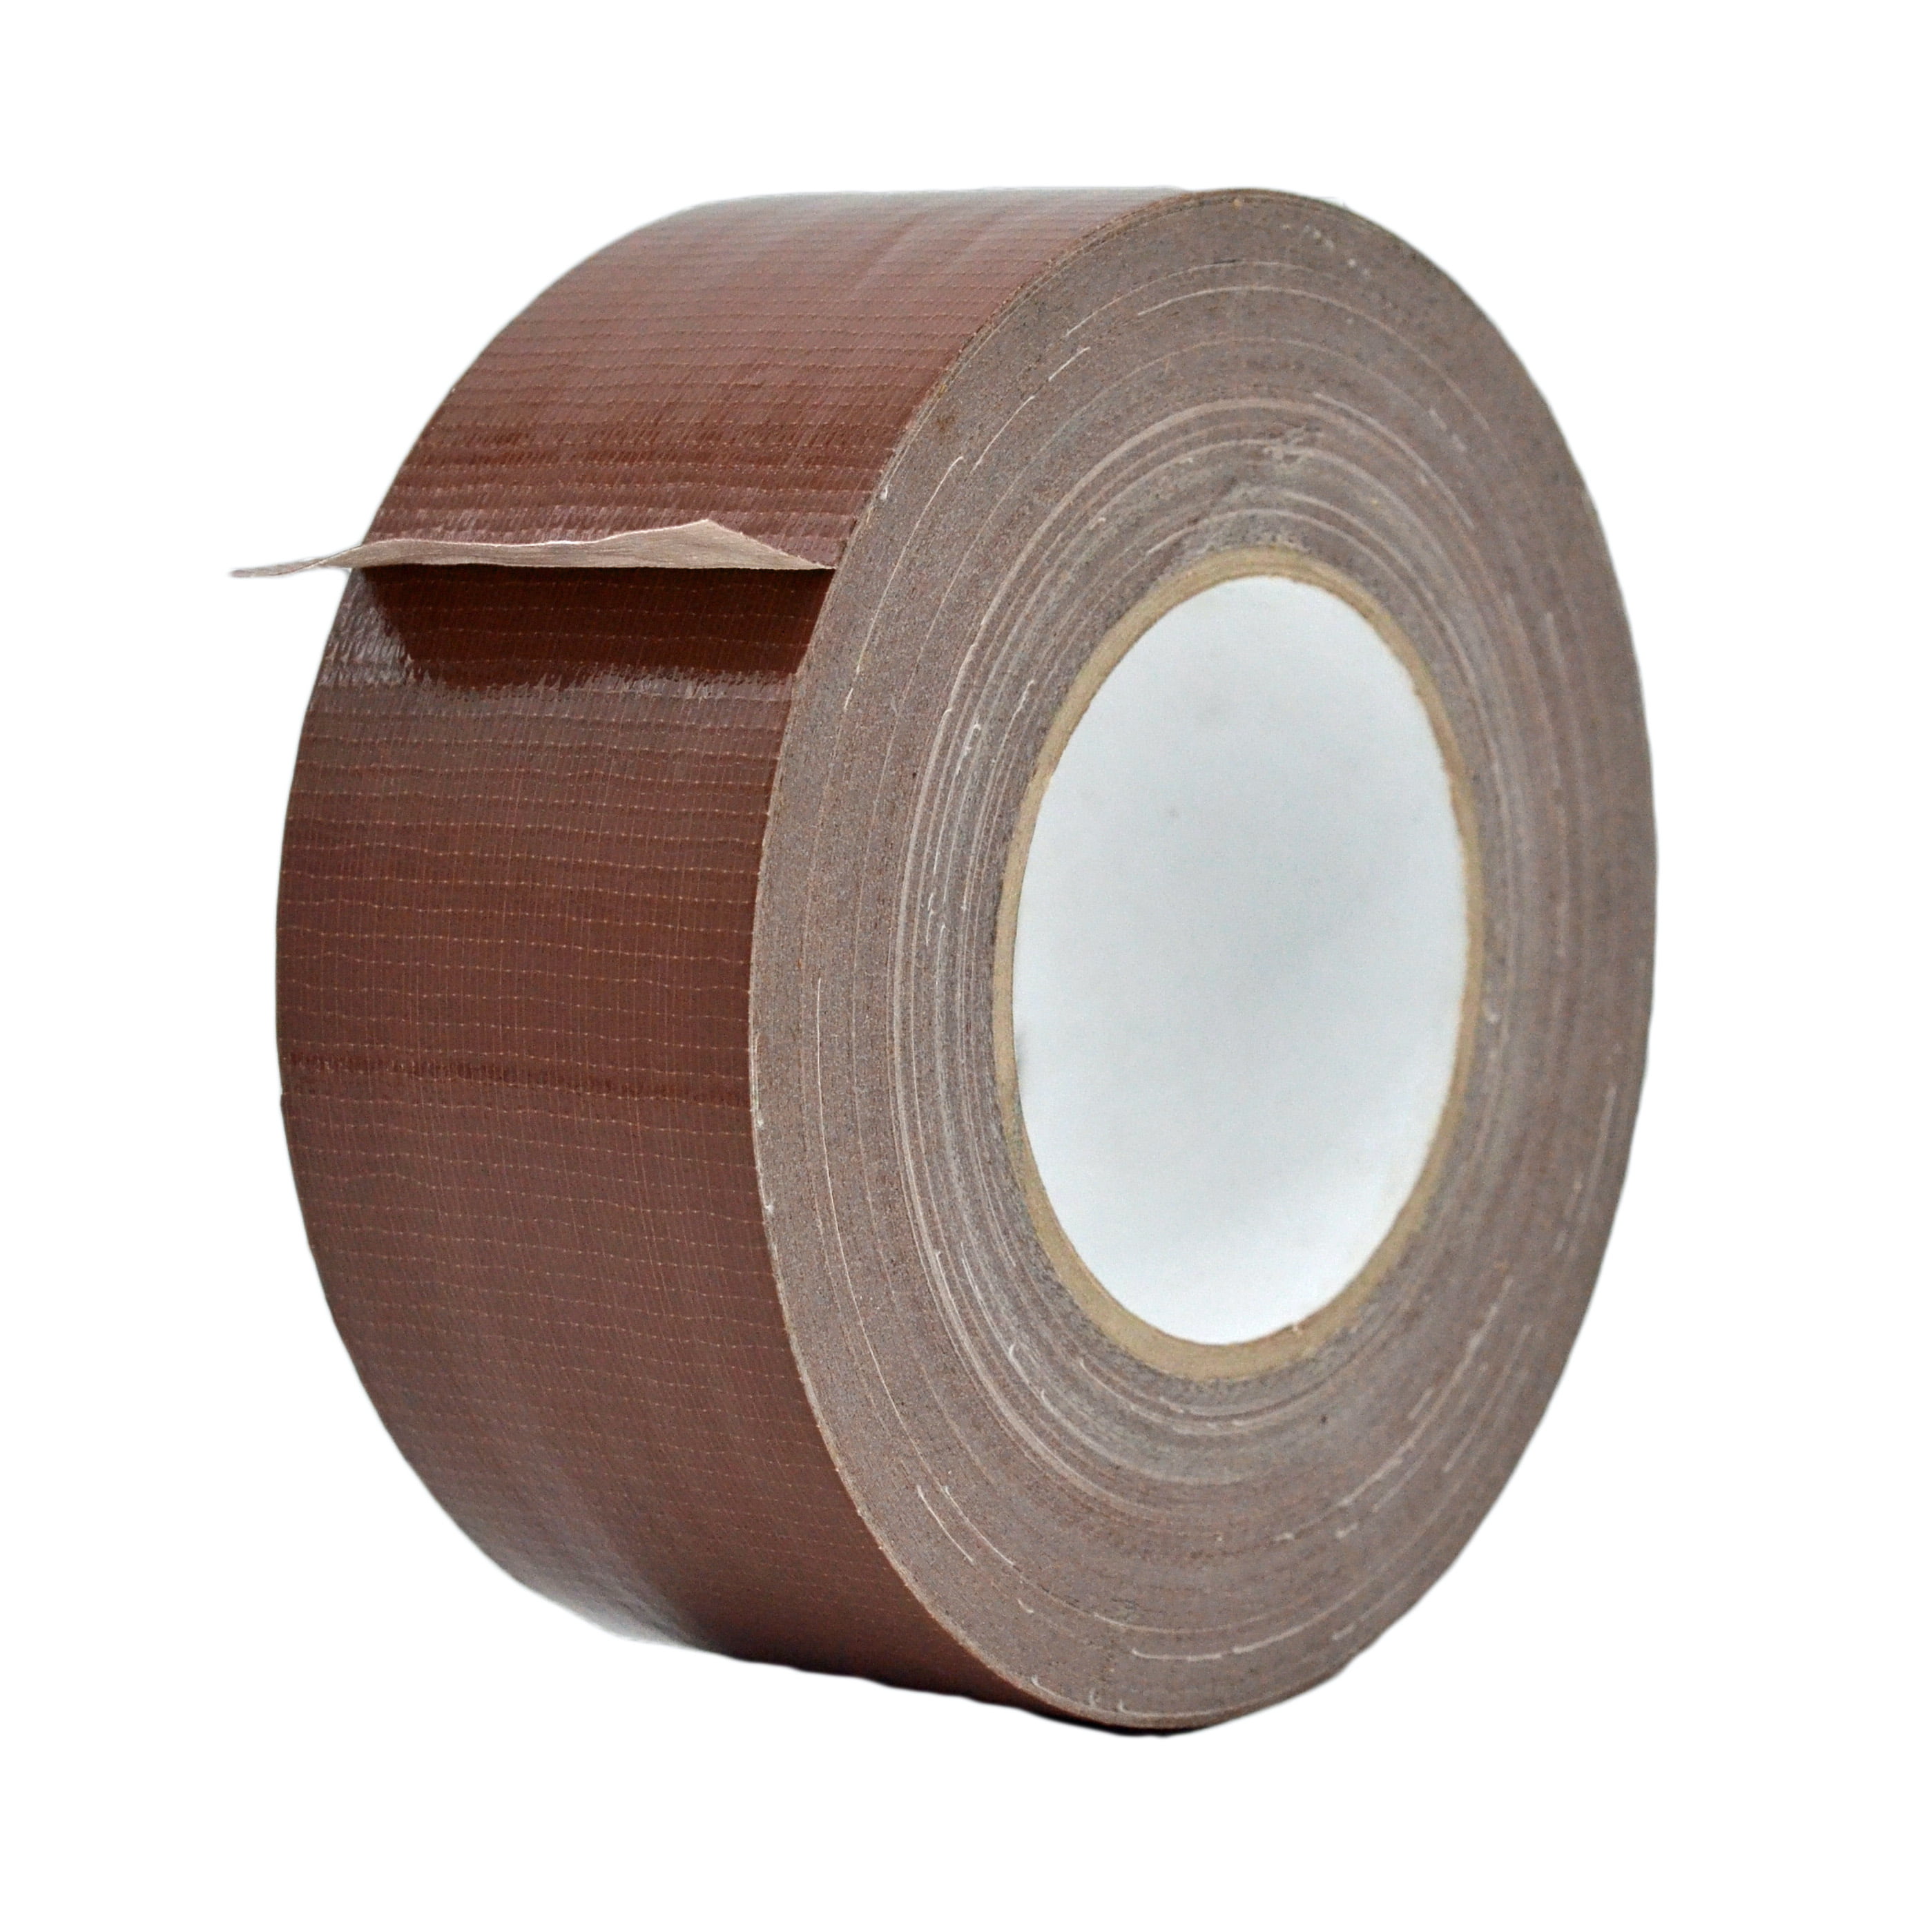 MAT Tape Dark Green 2.83 in. x 60 yd. Colored Duct Tape, 1 Roll